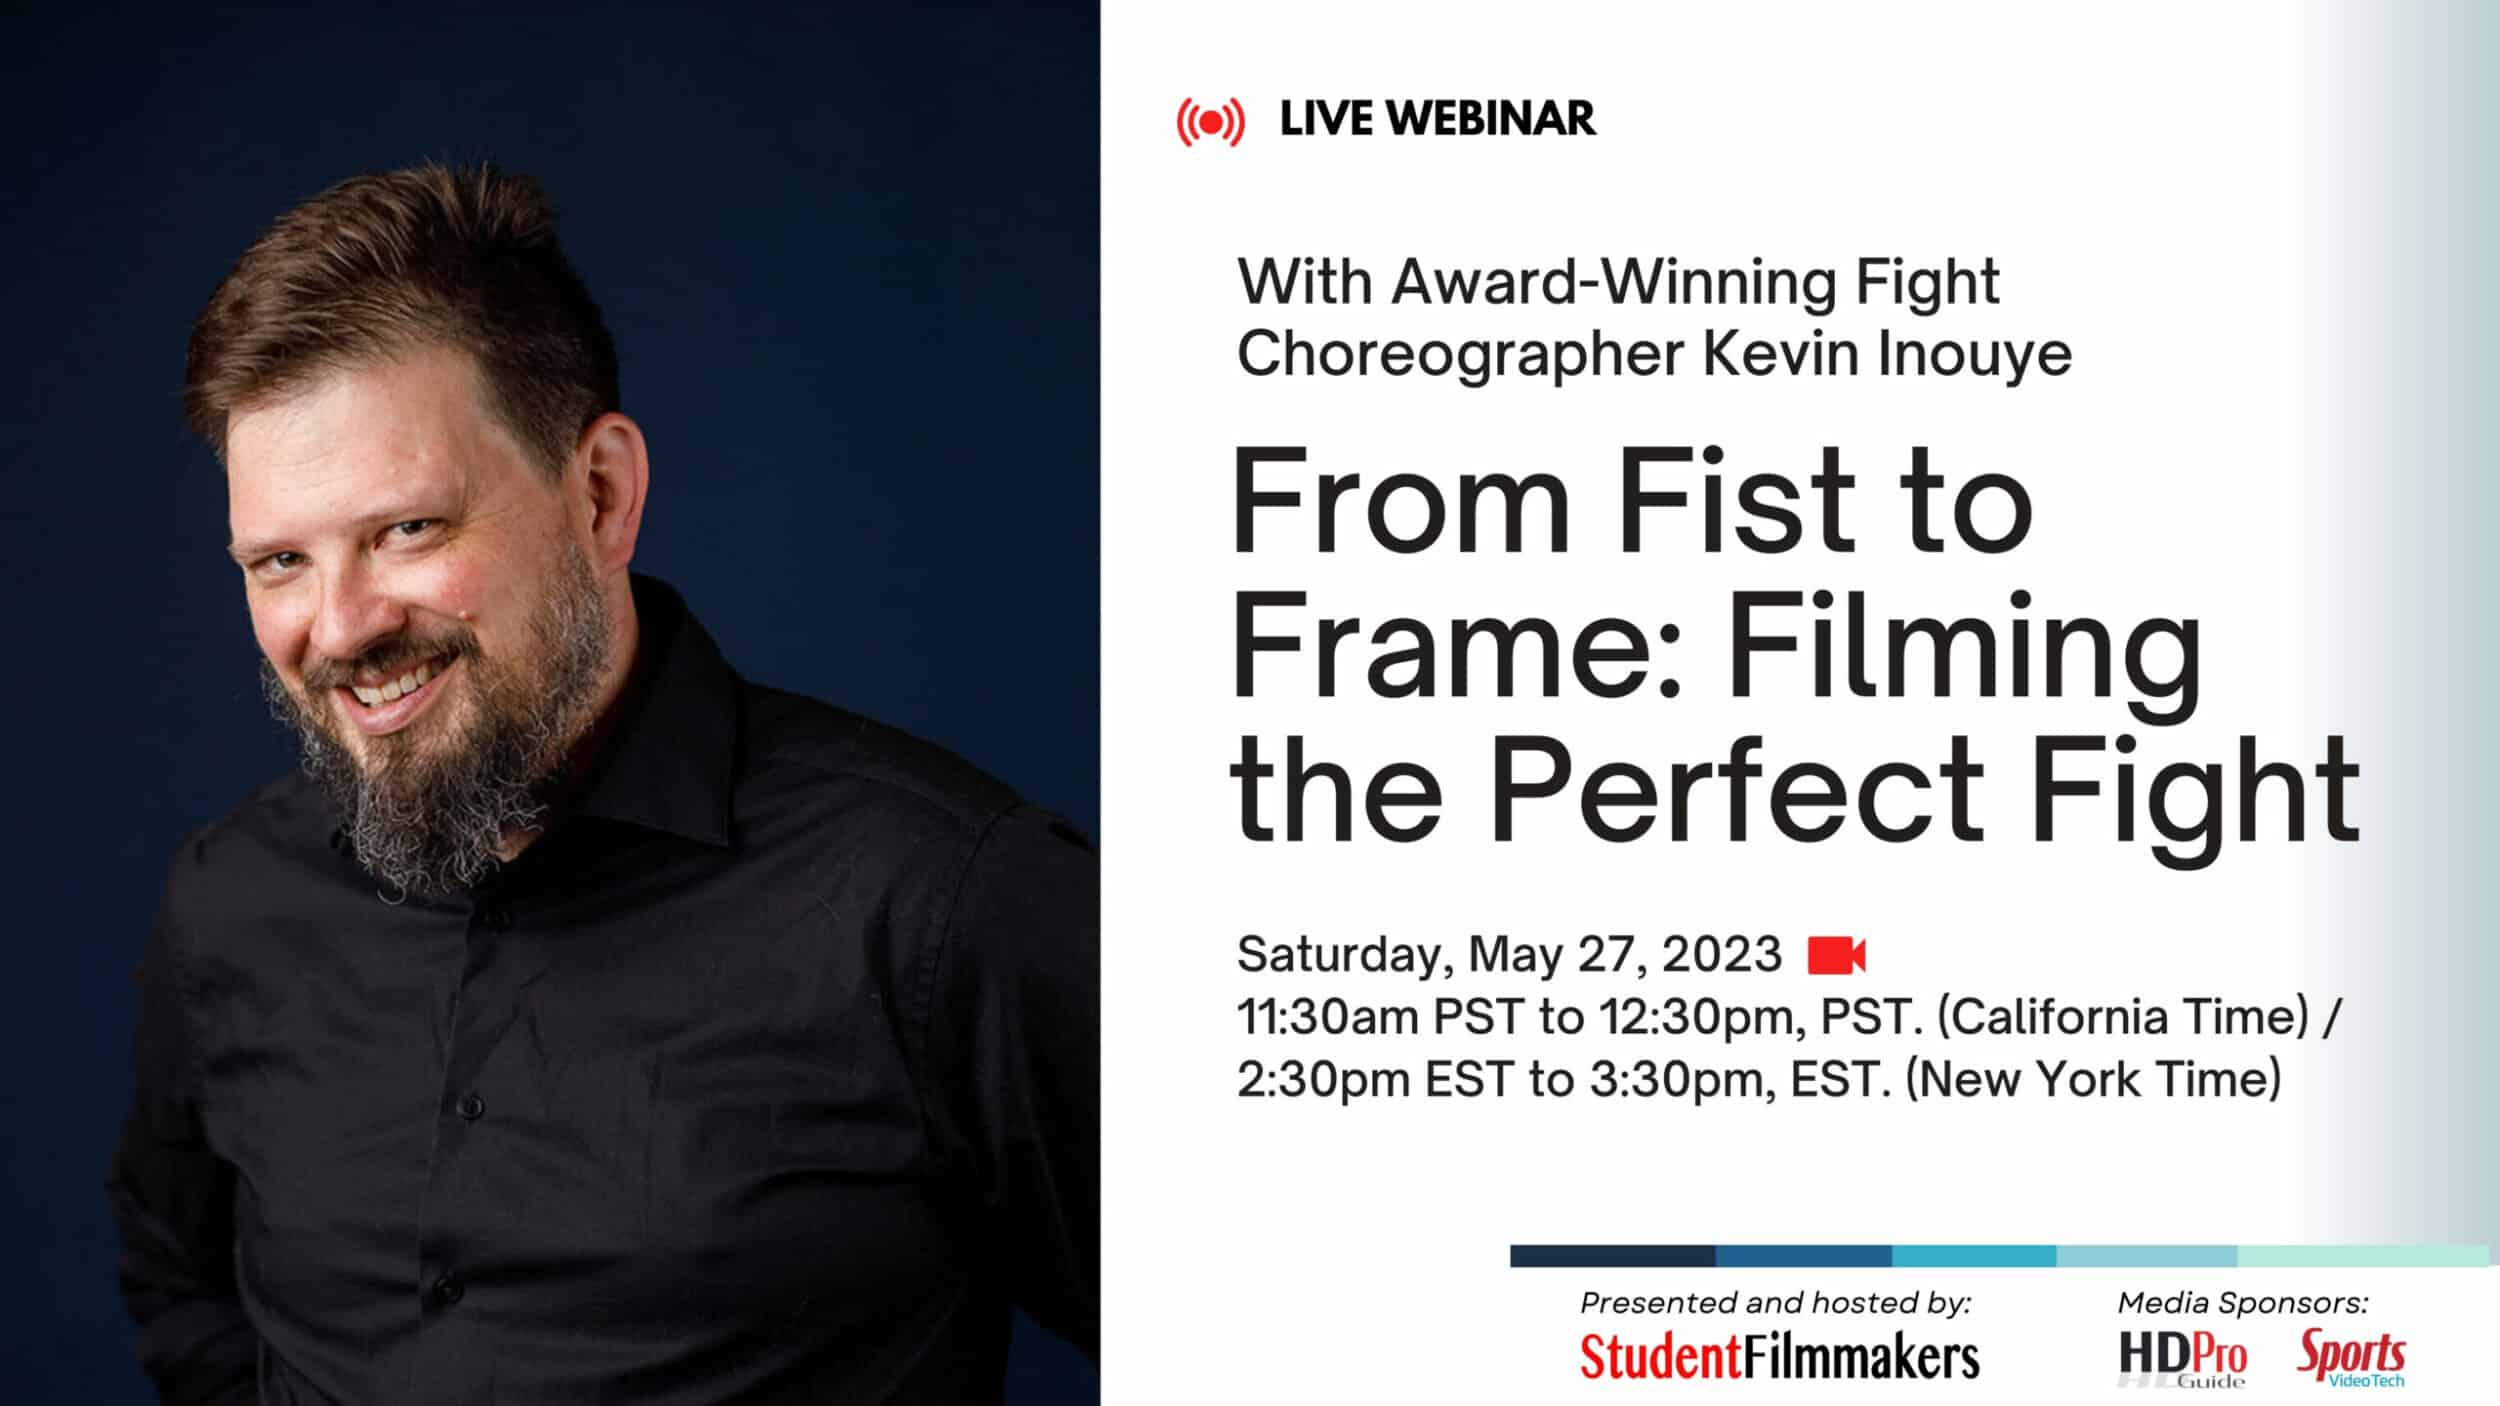 Webinar: From Fist to Frame: Filming the Perfect Fight With Award-Winning Fight Choreographer Kevin Inouye. Produced and hosted by StudentFilmmakers.com and Student Filmmakers Magazine